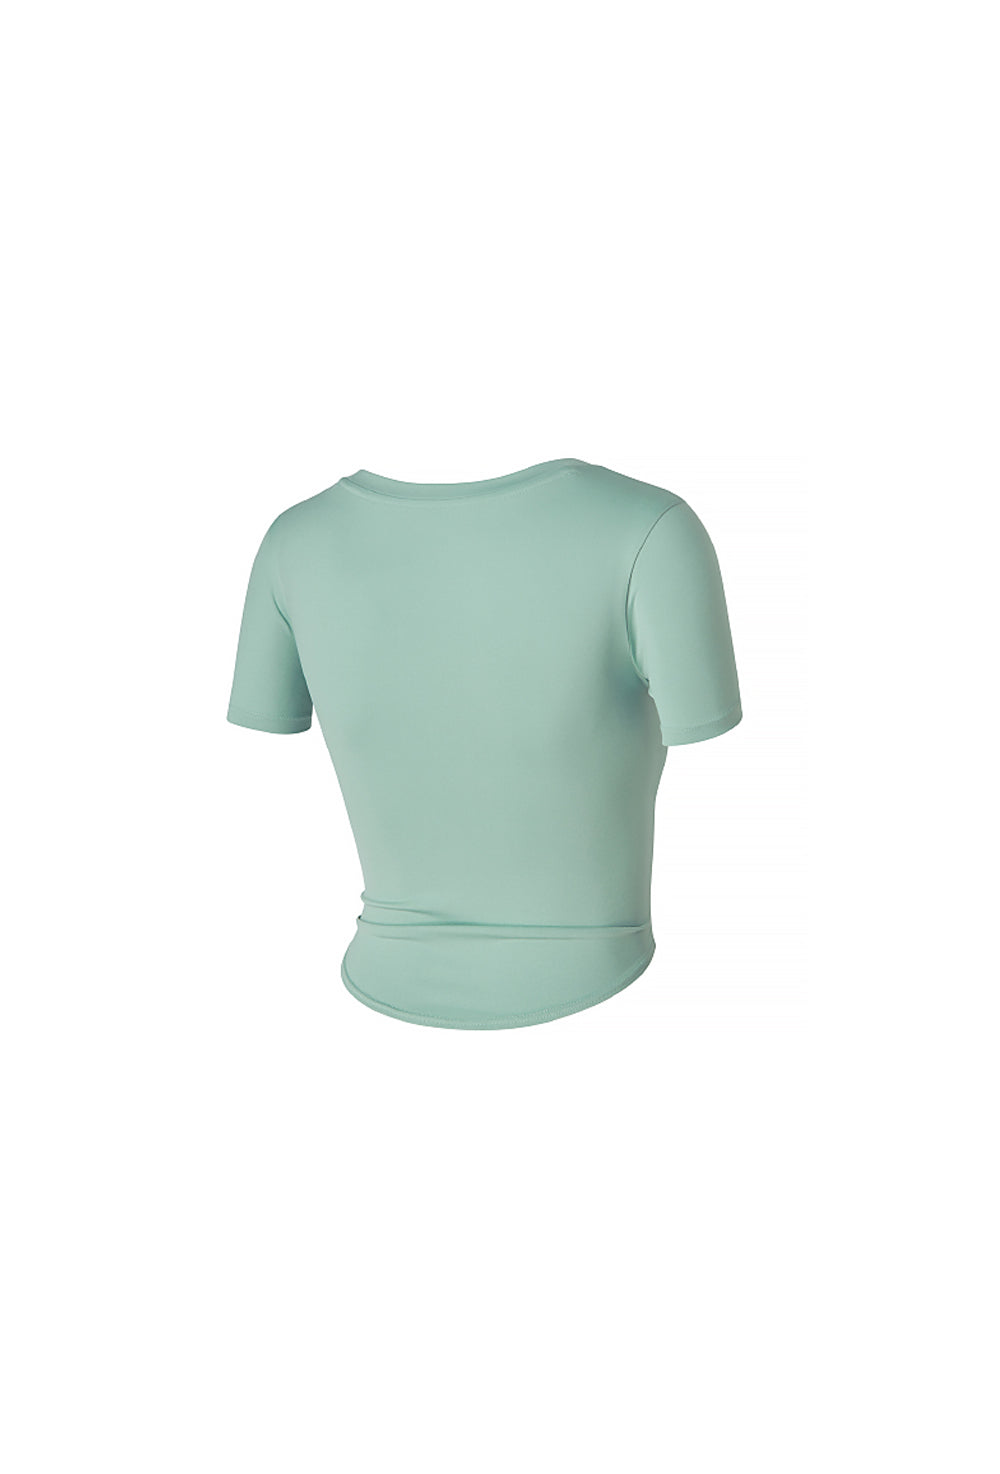 XELLA Light Round Crop Top - Just Mint (Clearance)